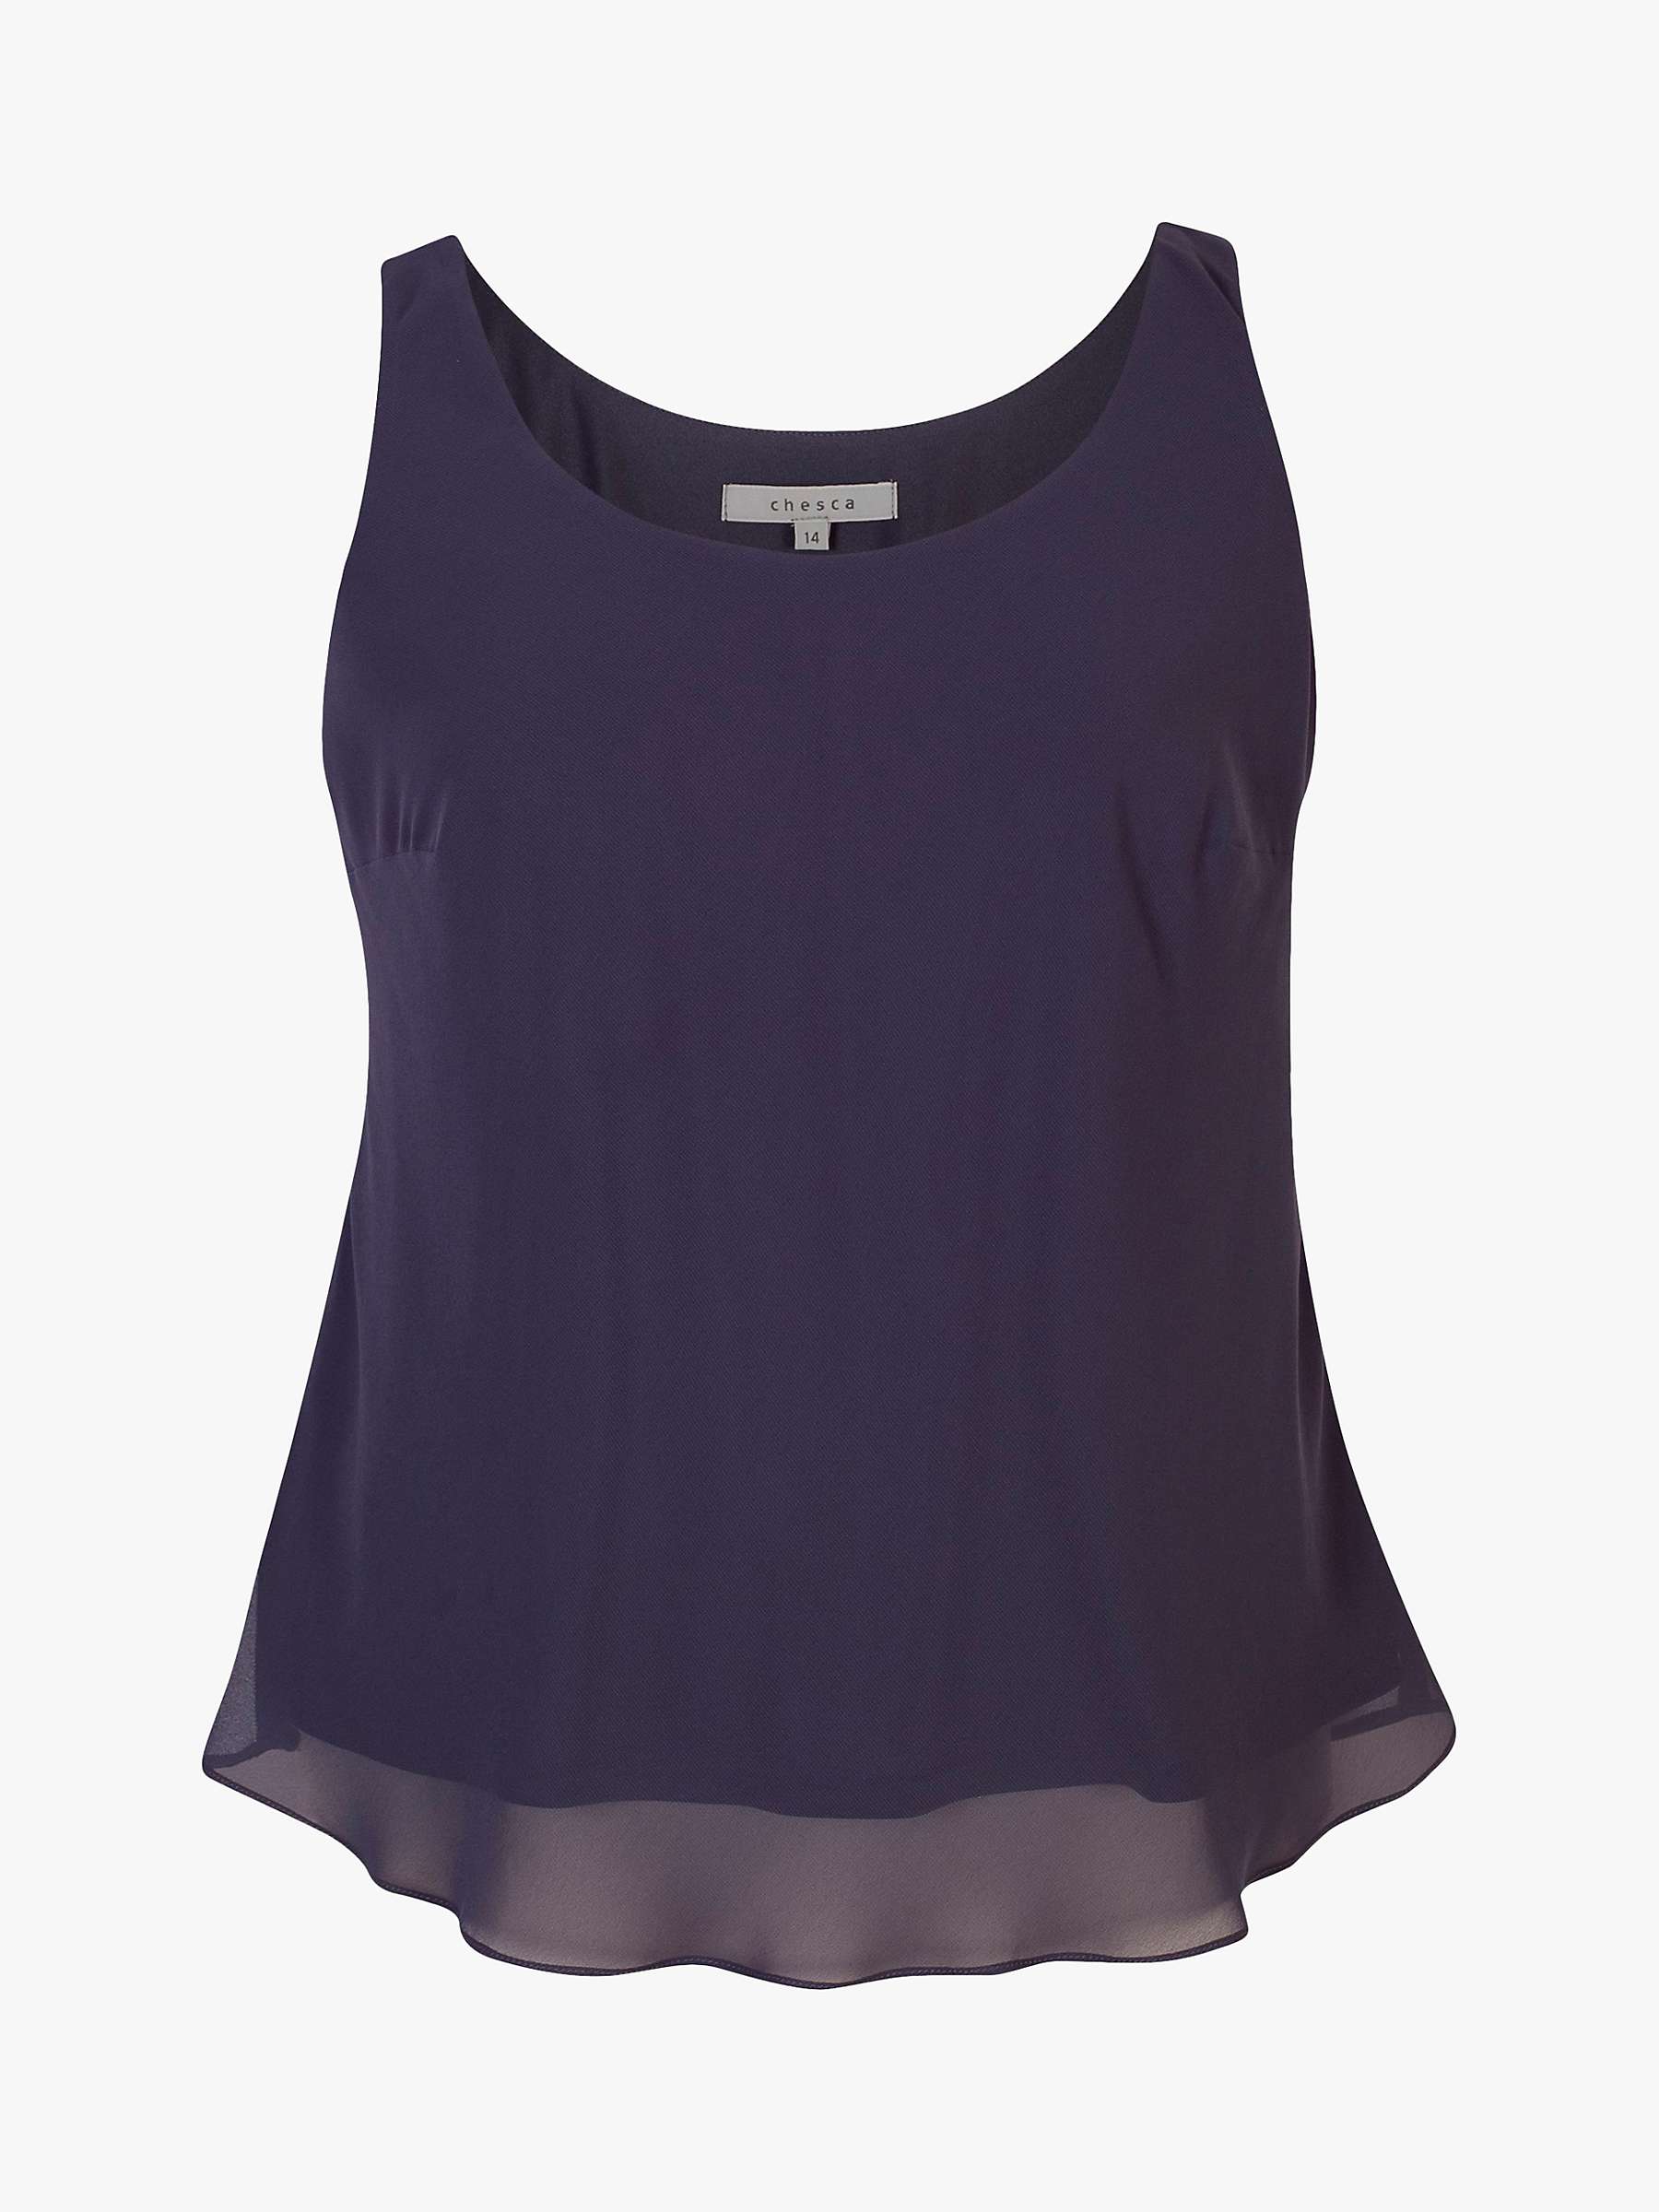 Buy Chesca Chiffon Camisole Online at johnlewis.com